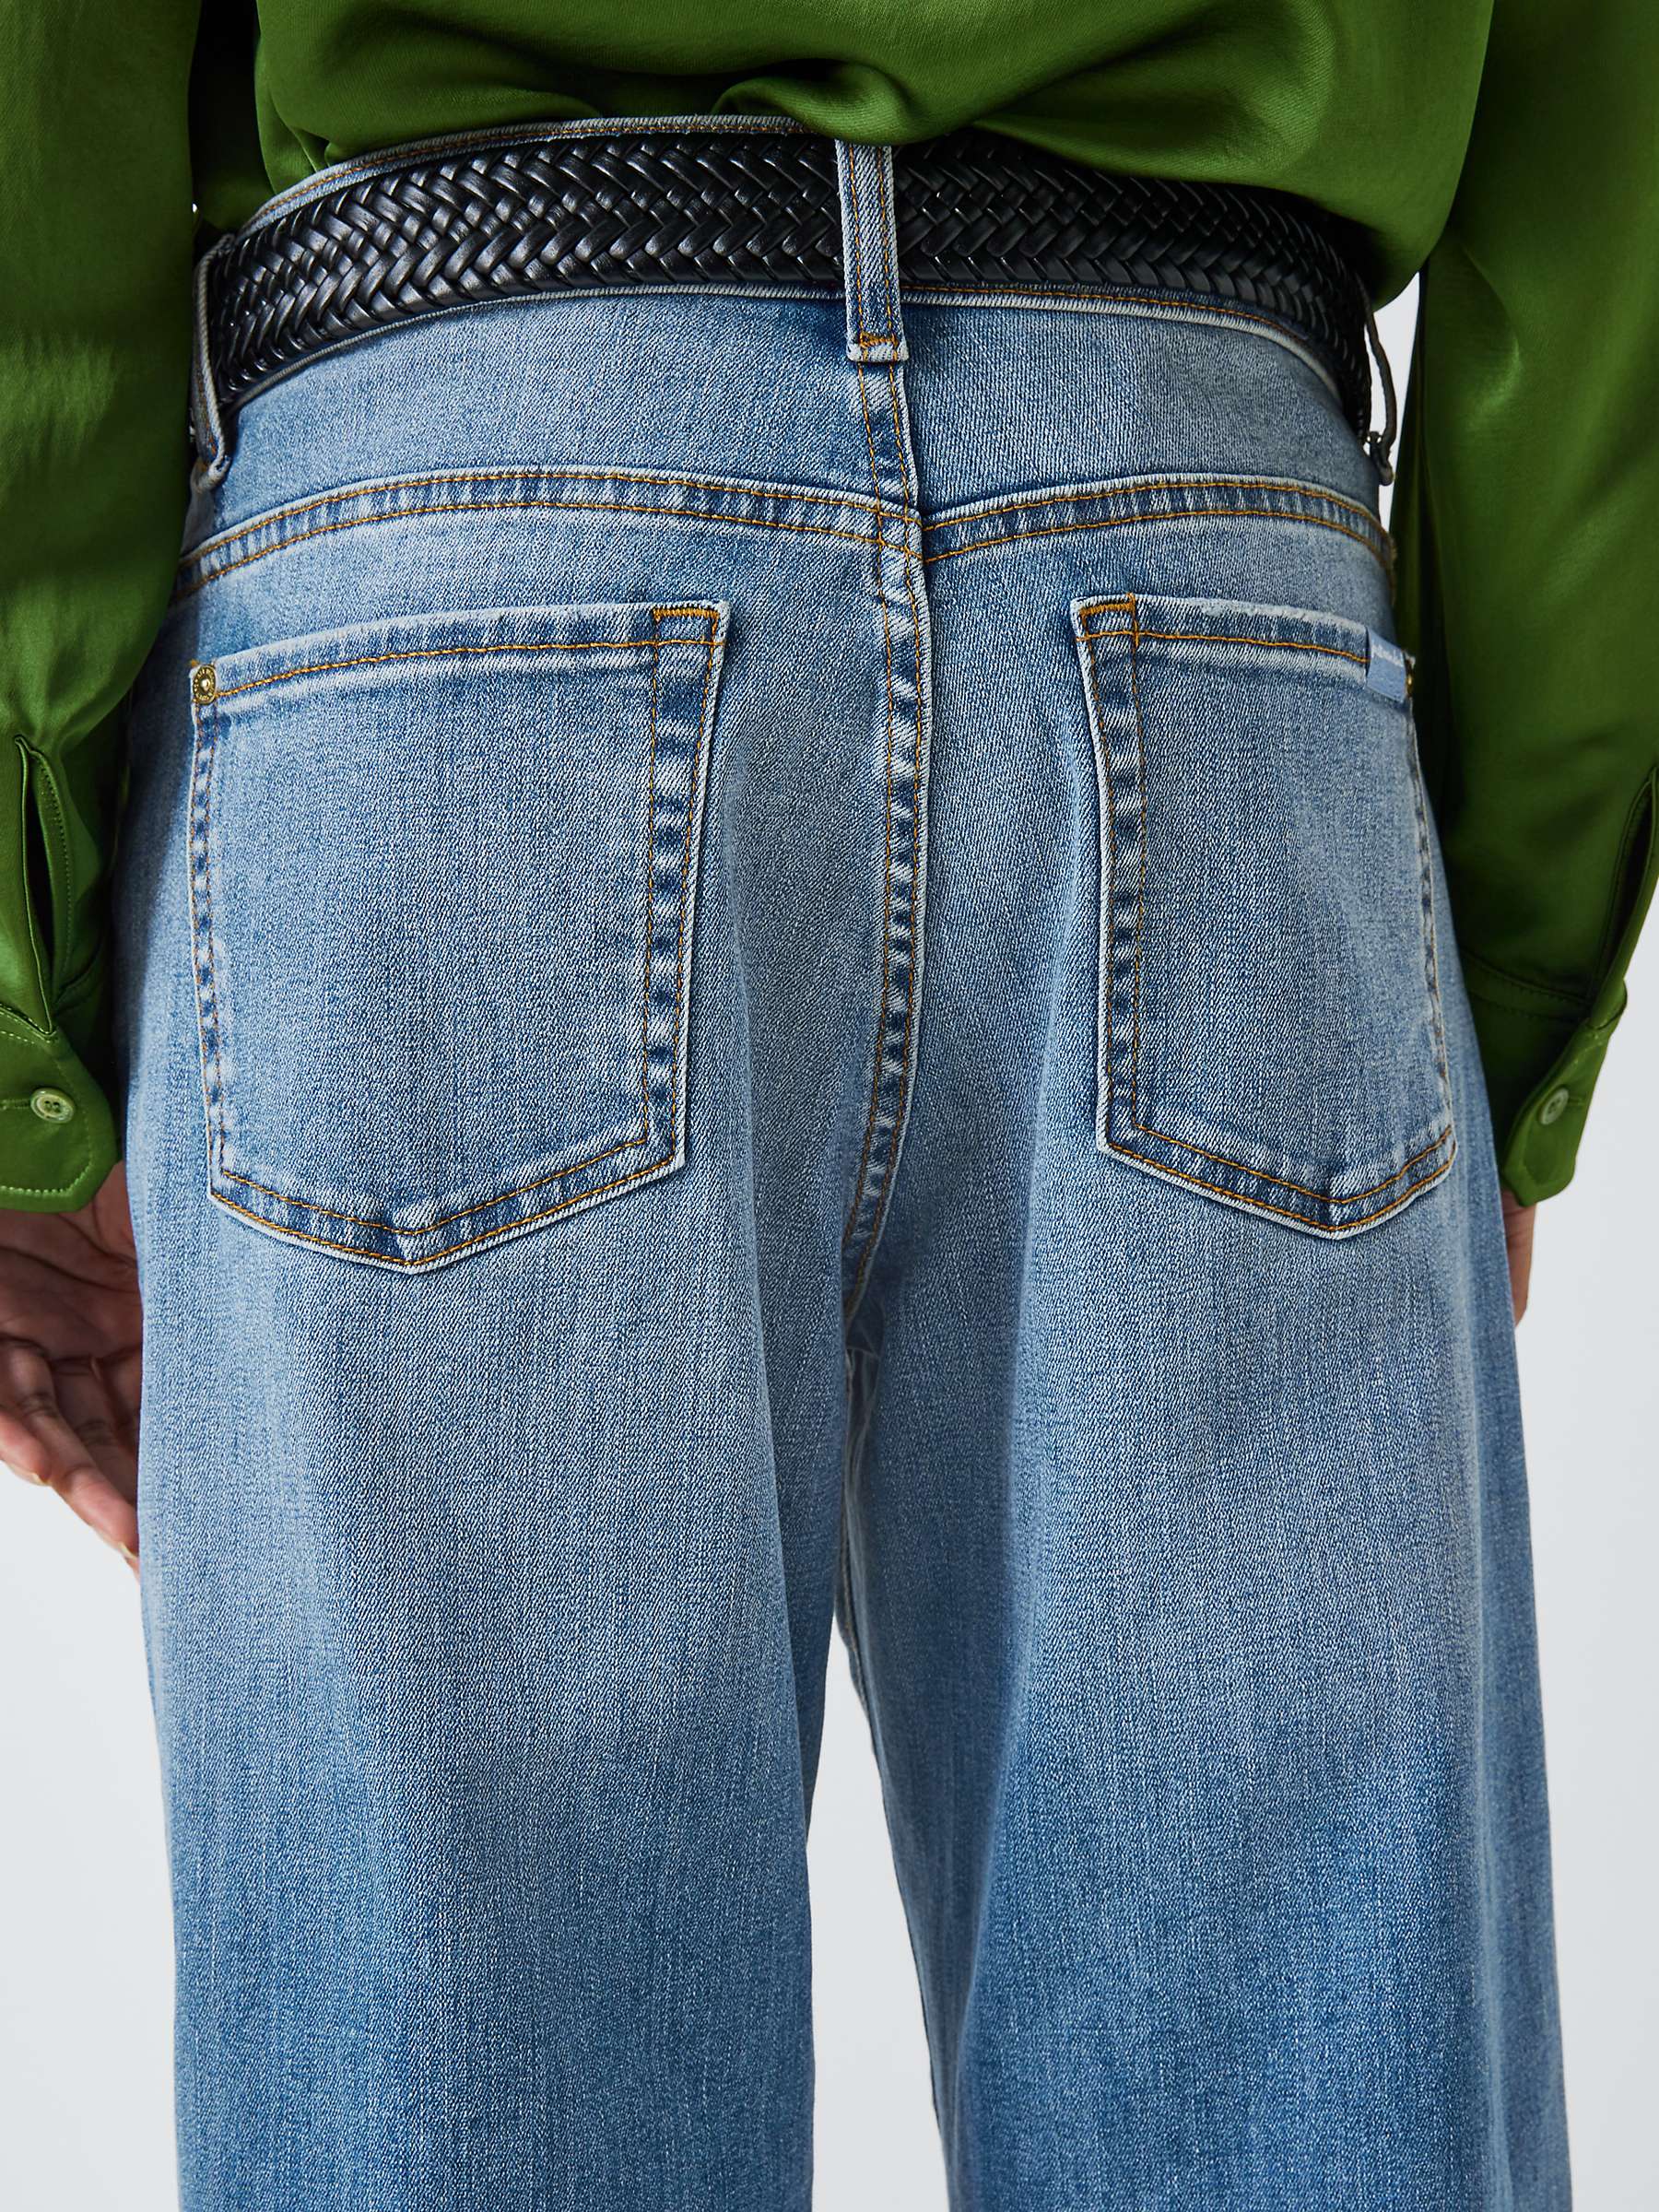 Buy 7 For All Mankind The Modern Straight Leg Jeans, Diary Online at johnlewis.com